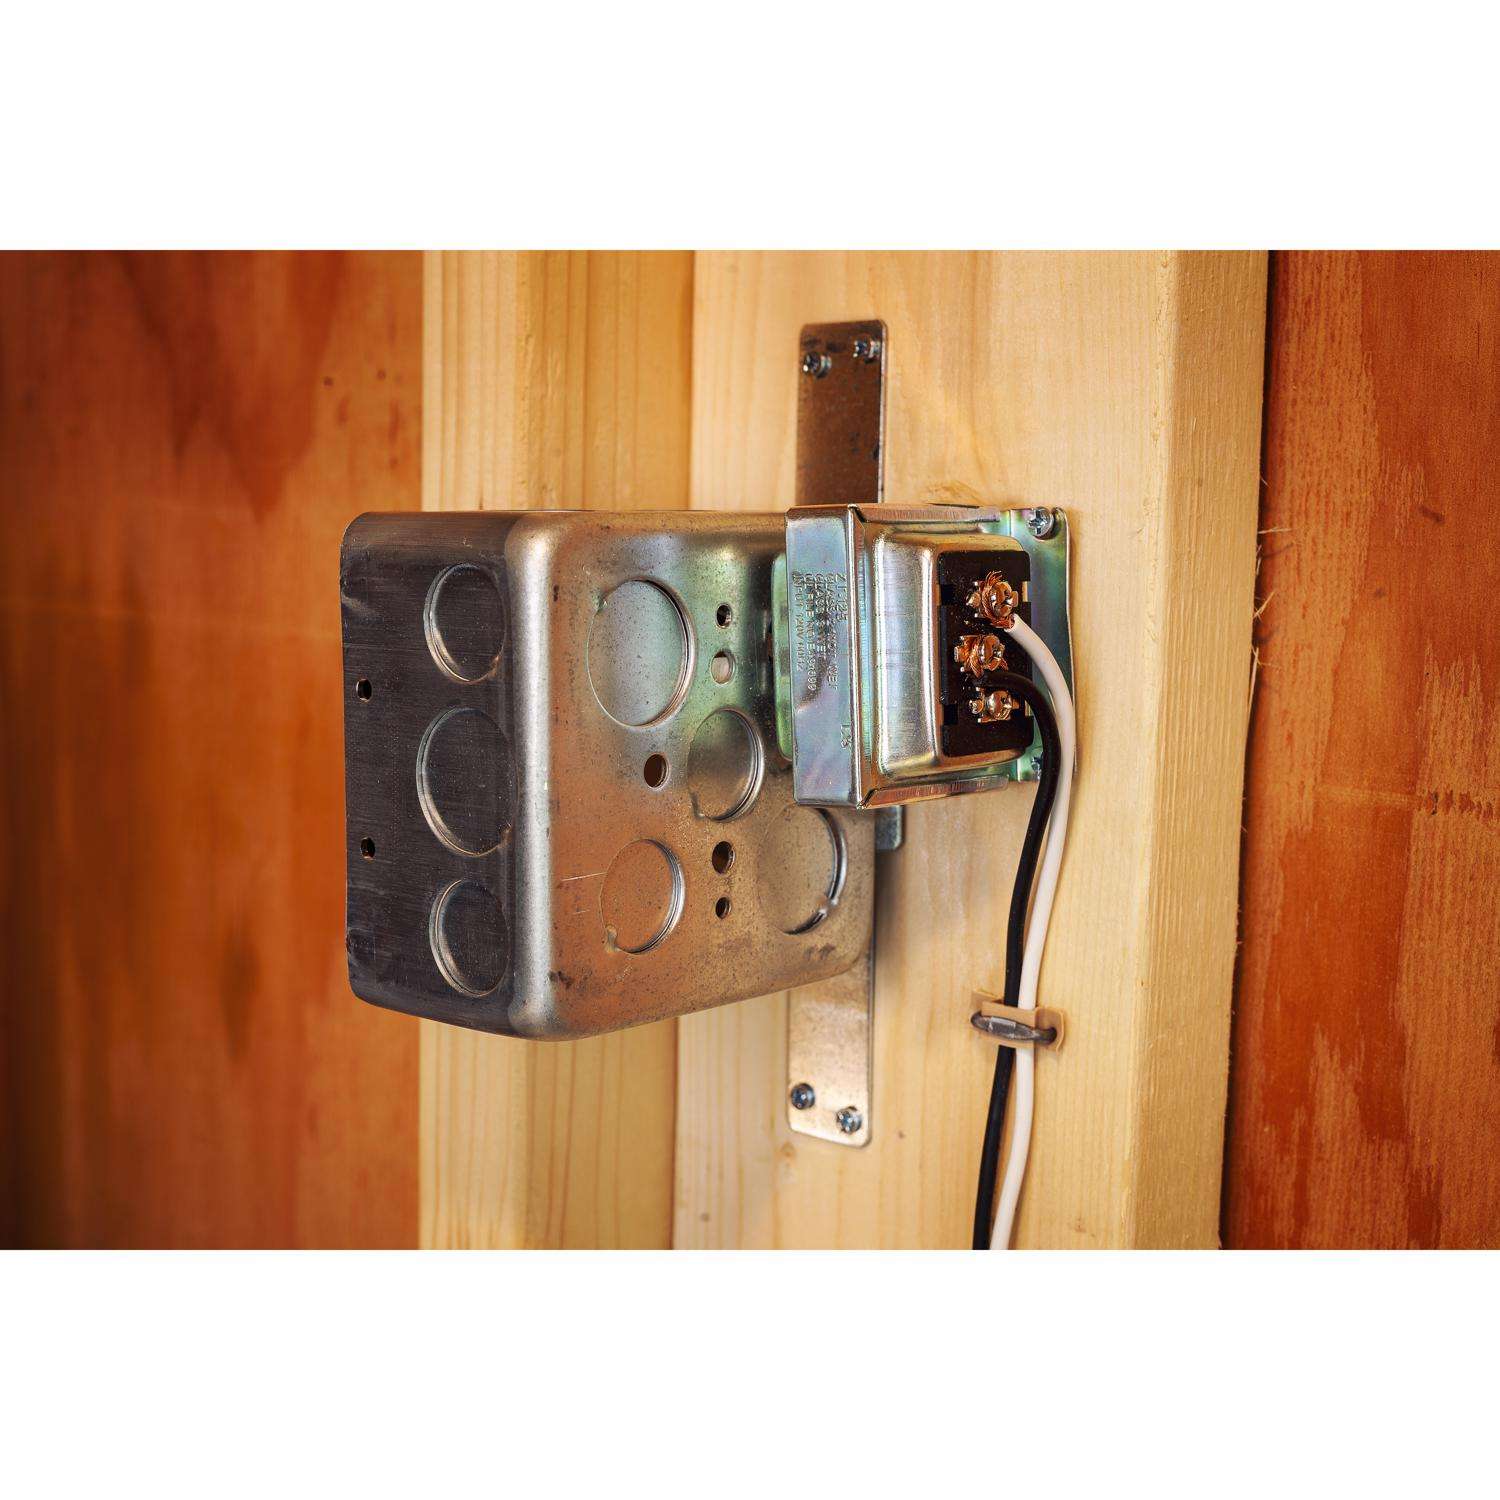 electrical - Wiring low voltage doorbell wire through exterior wall and  studs - Home Improvement Stack Exchange